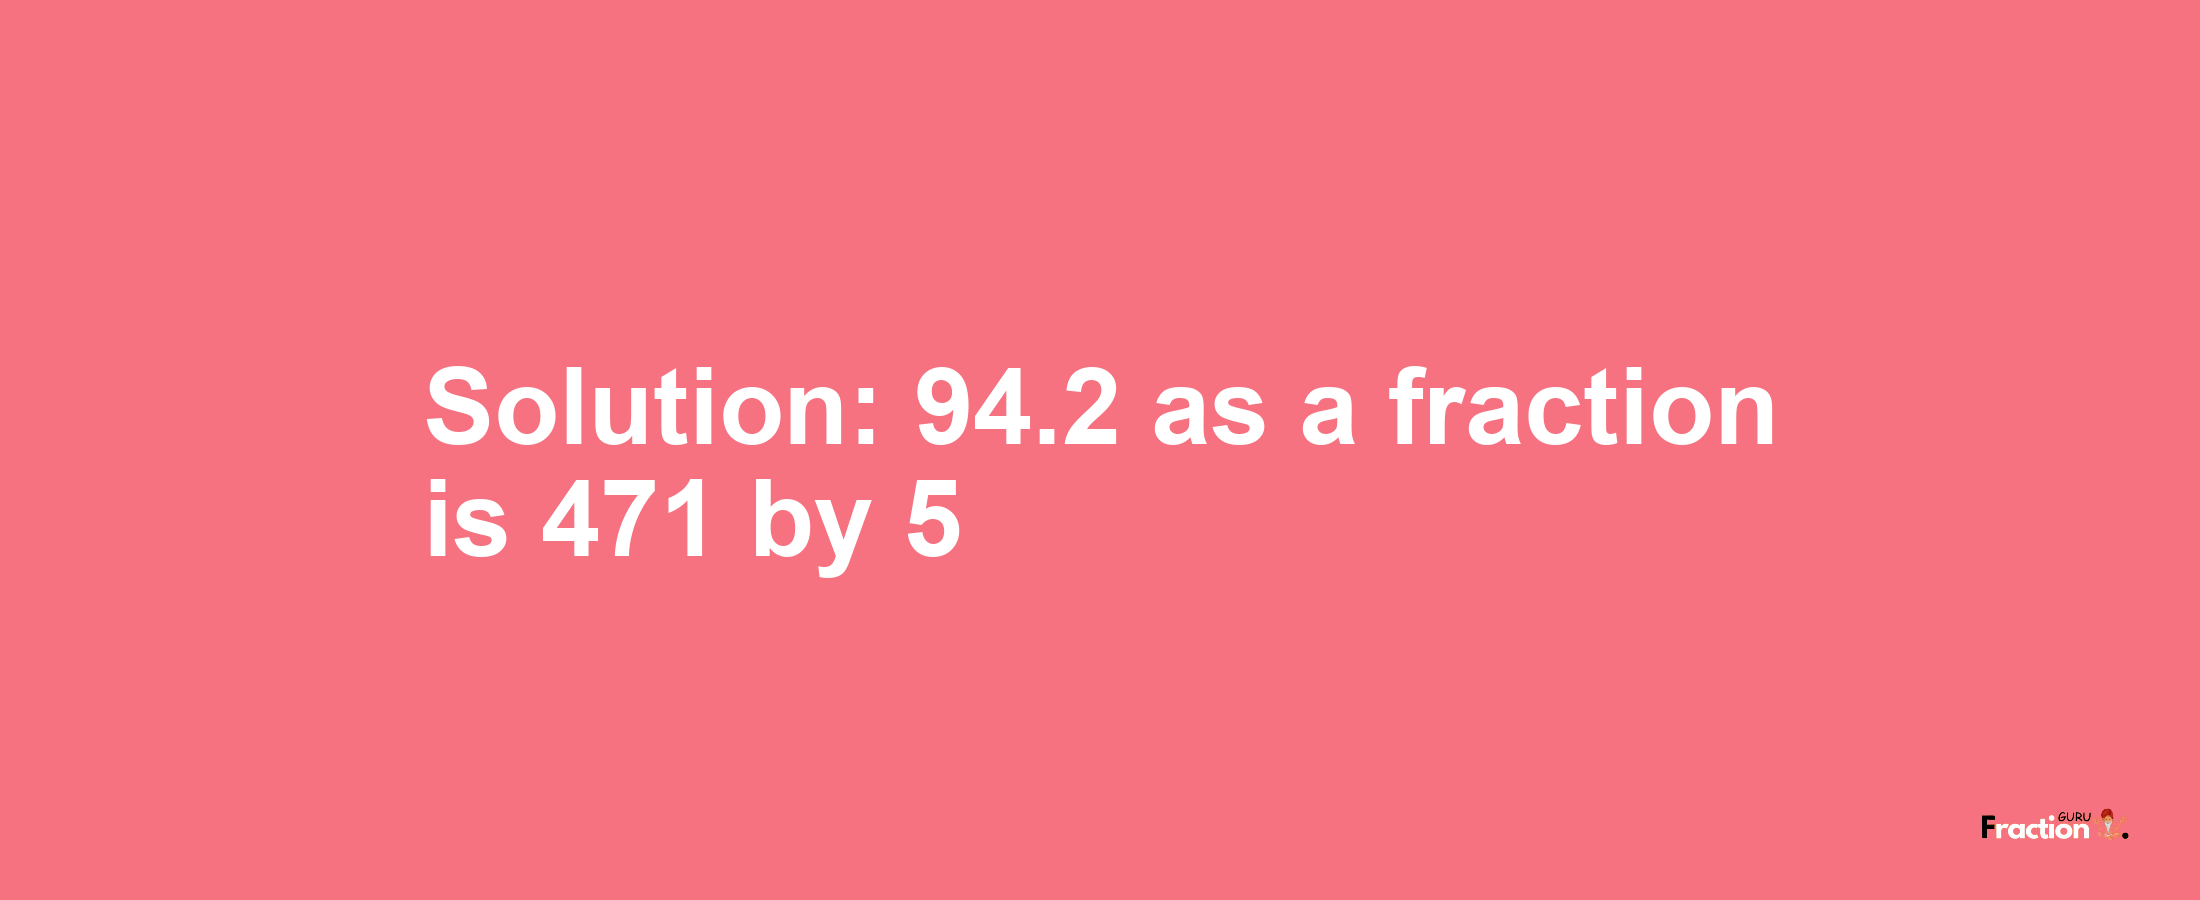 Solution:94.2 as a fraction is 471/5